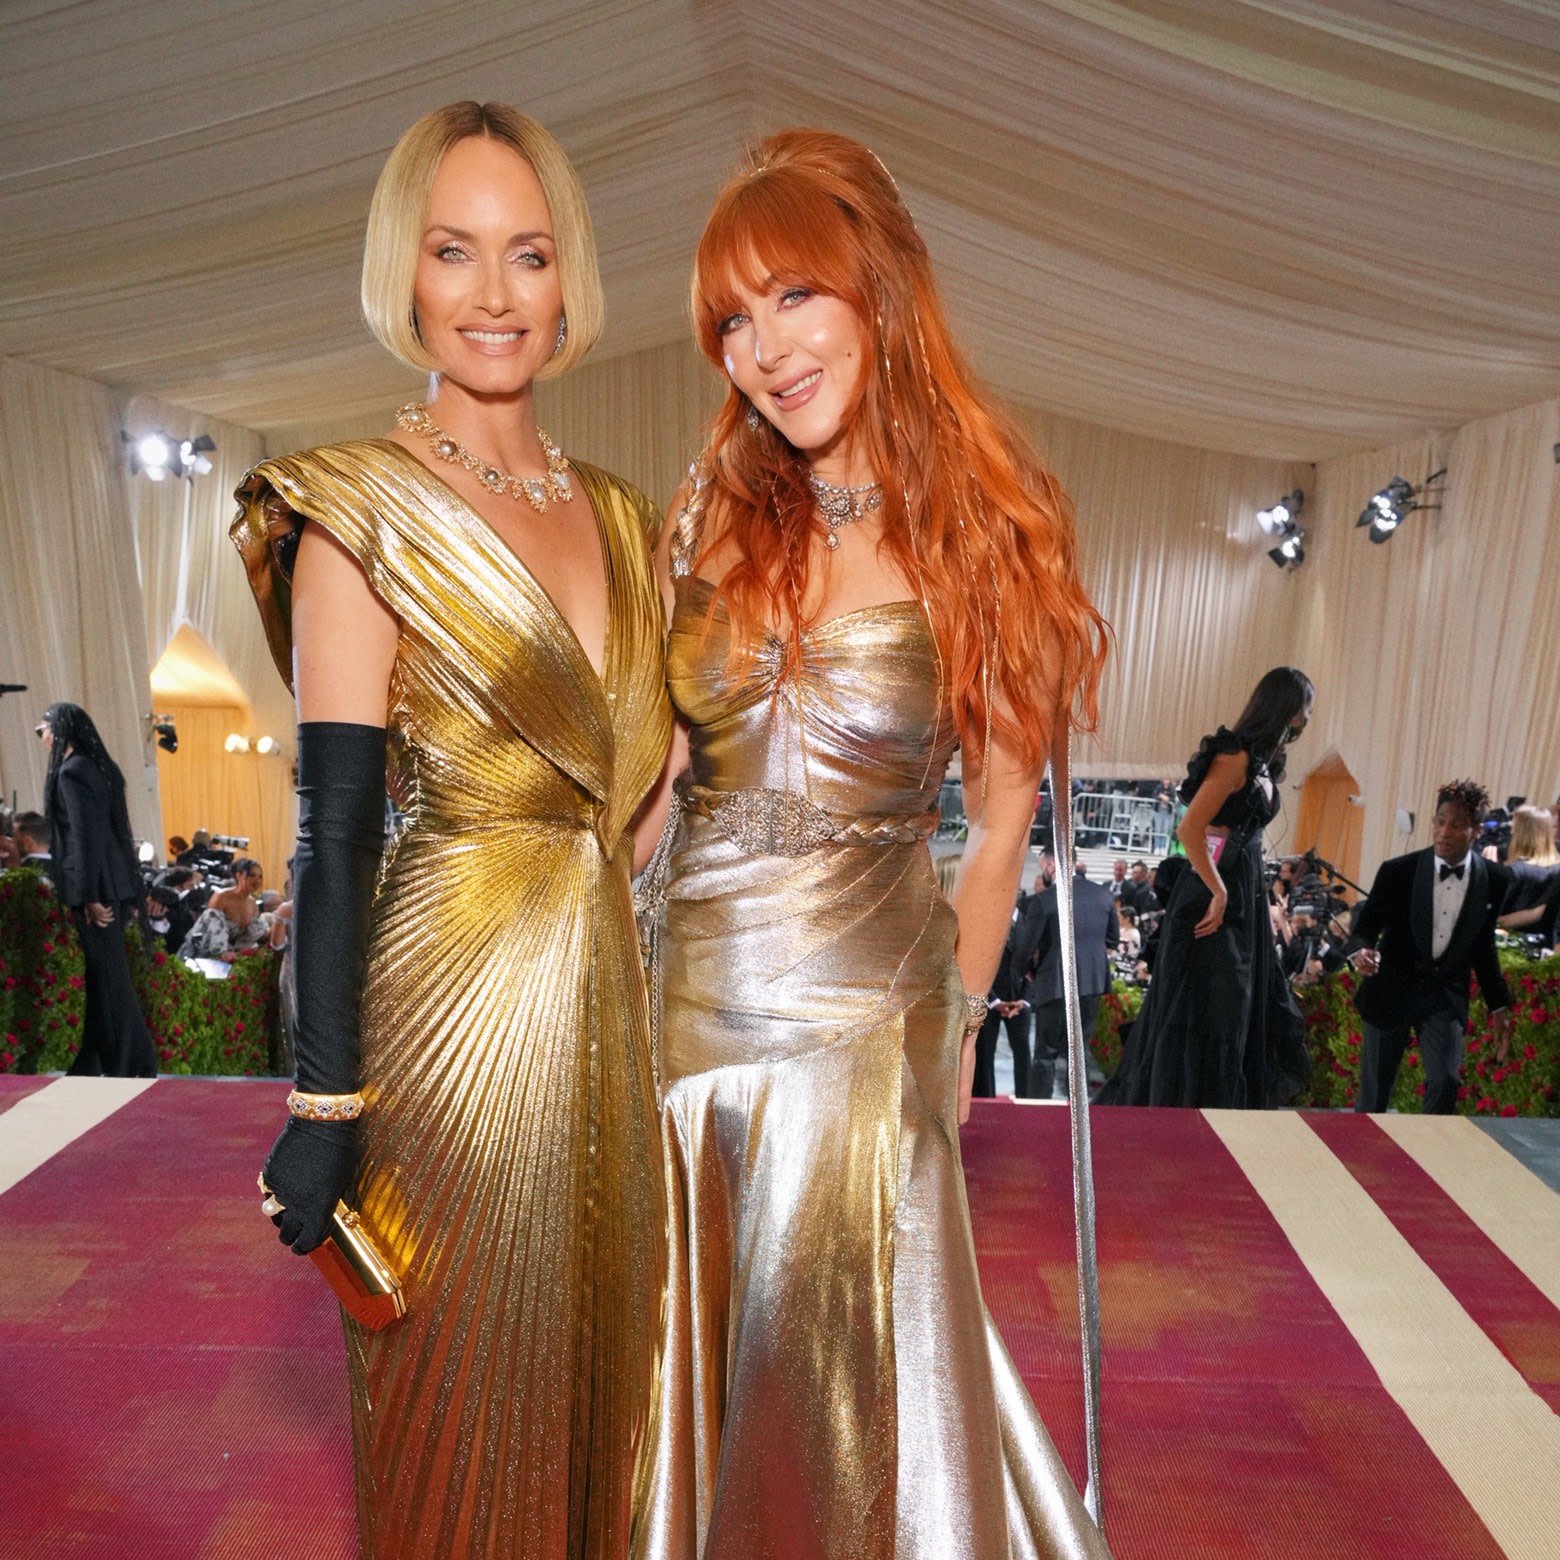 Charlotte Tilbury with a model on The Met Gala, both wearing shiny, reflective gowns in silver and gold with full-glam nude pink makeup.